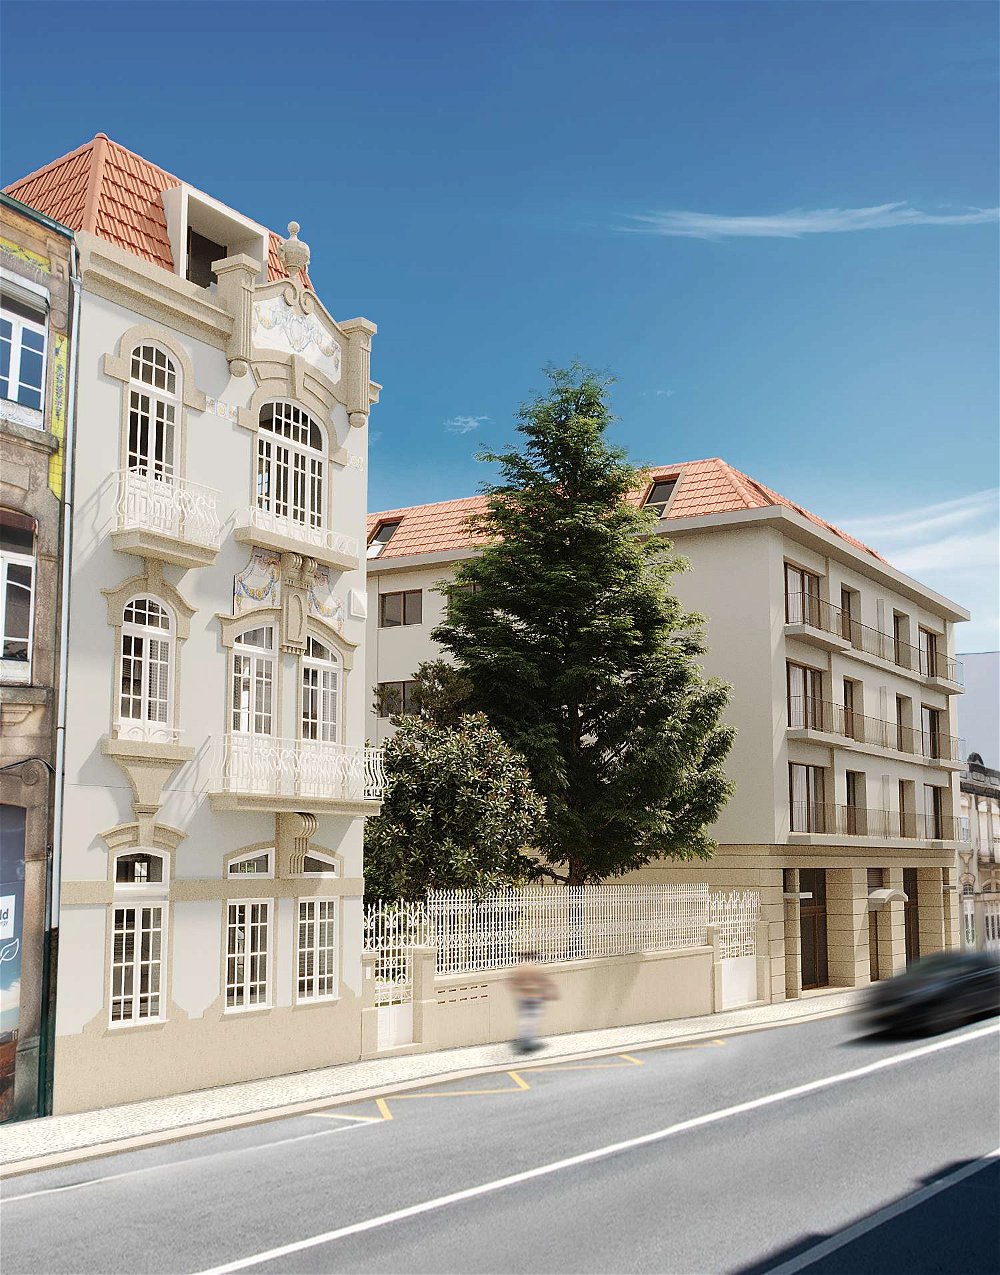 3 bedroom apartment duplex with balcony and parking in Porto 383715038